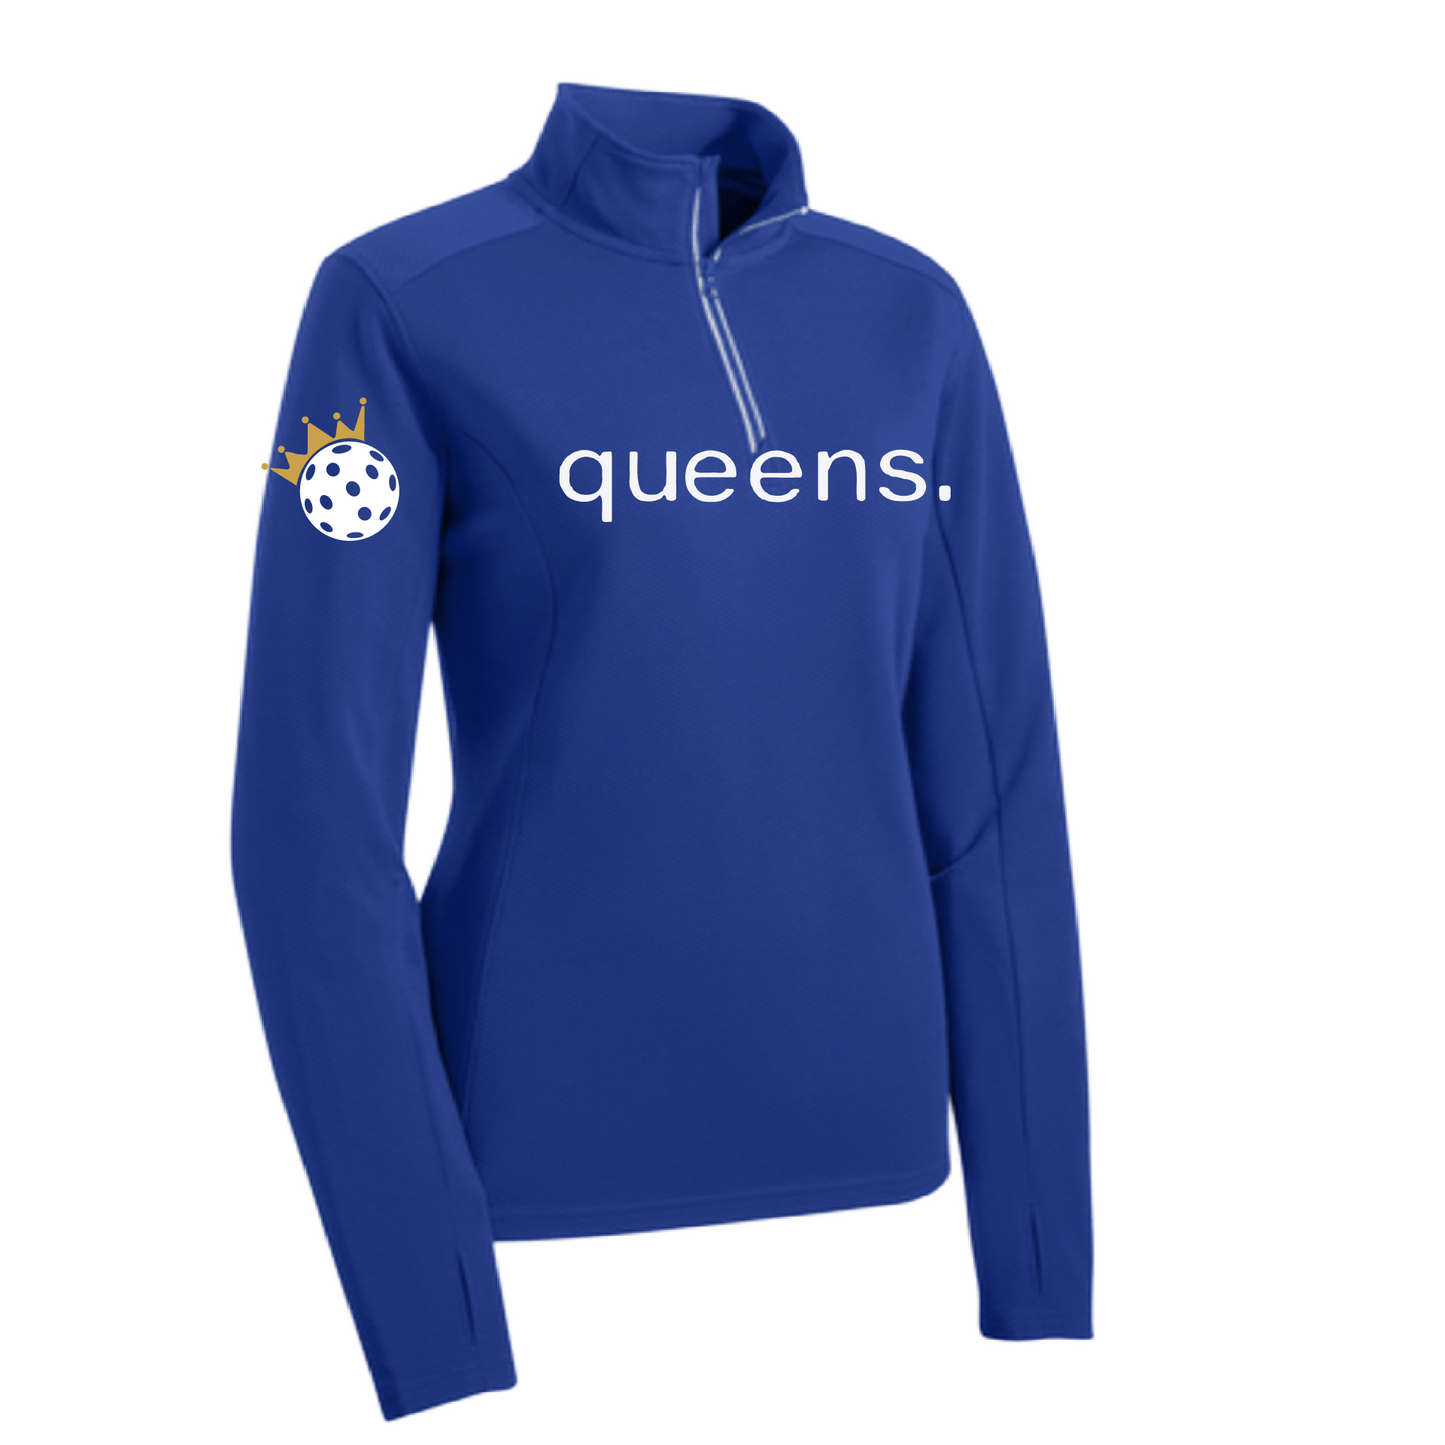 Design: Pickleball Queen and Crown  This Women's 1/4-Zip Pullover features princess seams and a drop tail hem, making it the perfect mix of comfort and style. The material is lightweight and breathable and boasts moisture-wicking properties and a tri-blend softness. The PosiCharge technology ensures vivid, vibrant color that is locked in and stays looking great. With its versatility, it can be worn year-round.